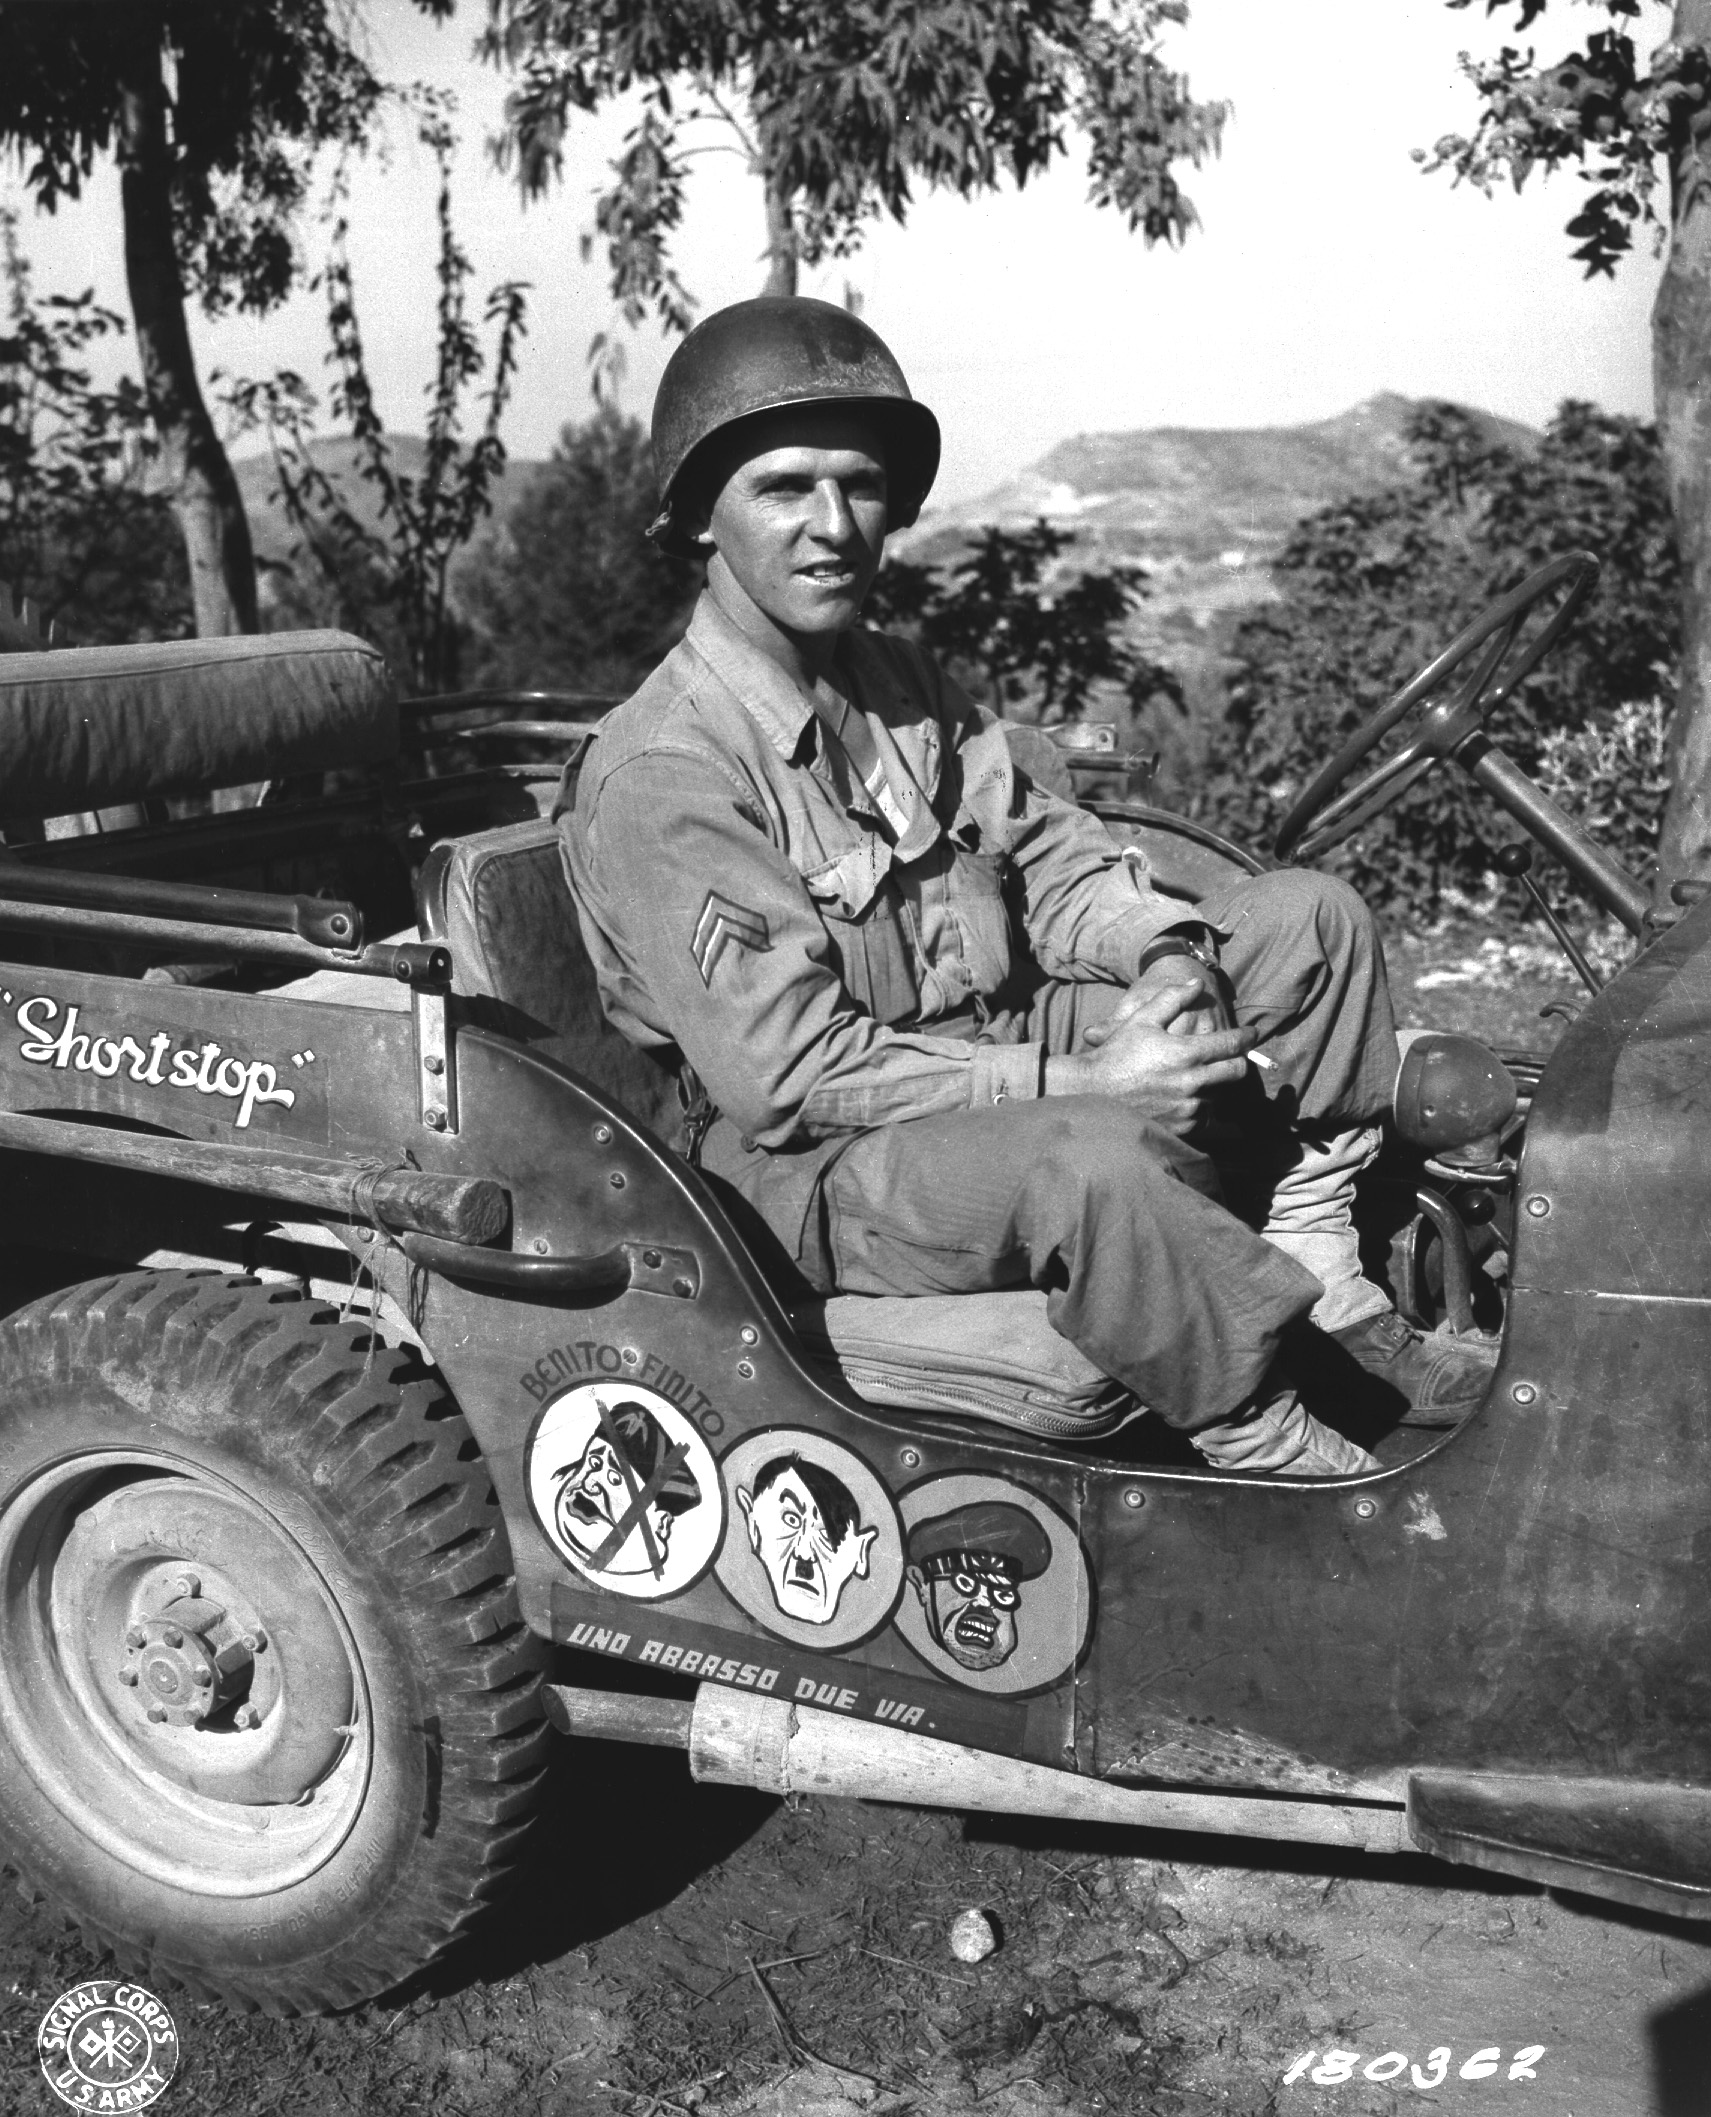 US Army Corporal Paul F. Janesk posing in his jeep in Sicily, Italy, 3 Sep 1943; note cartoon of Axis leaders drawn on his jeep, and Mussolini crossed out